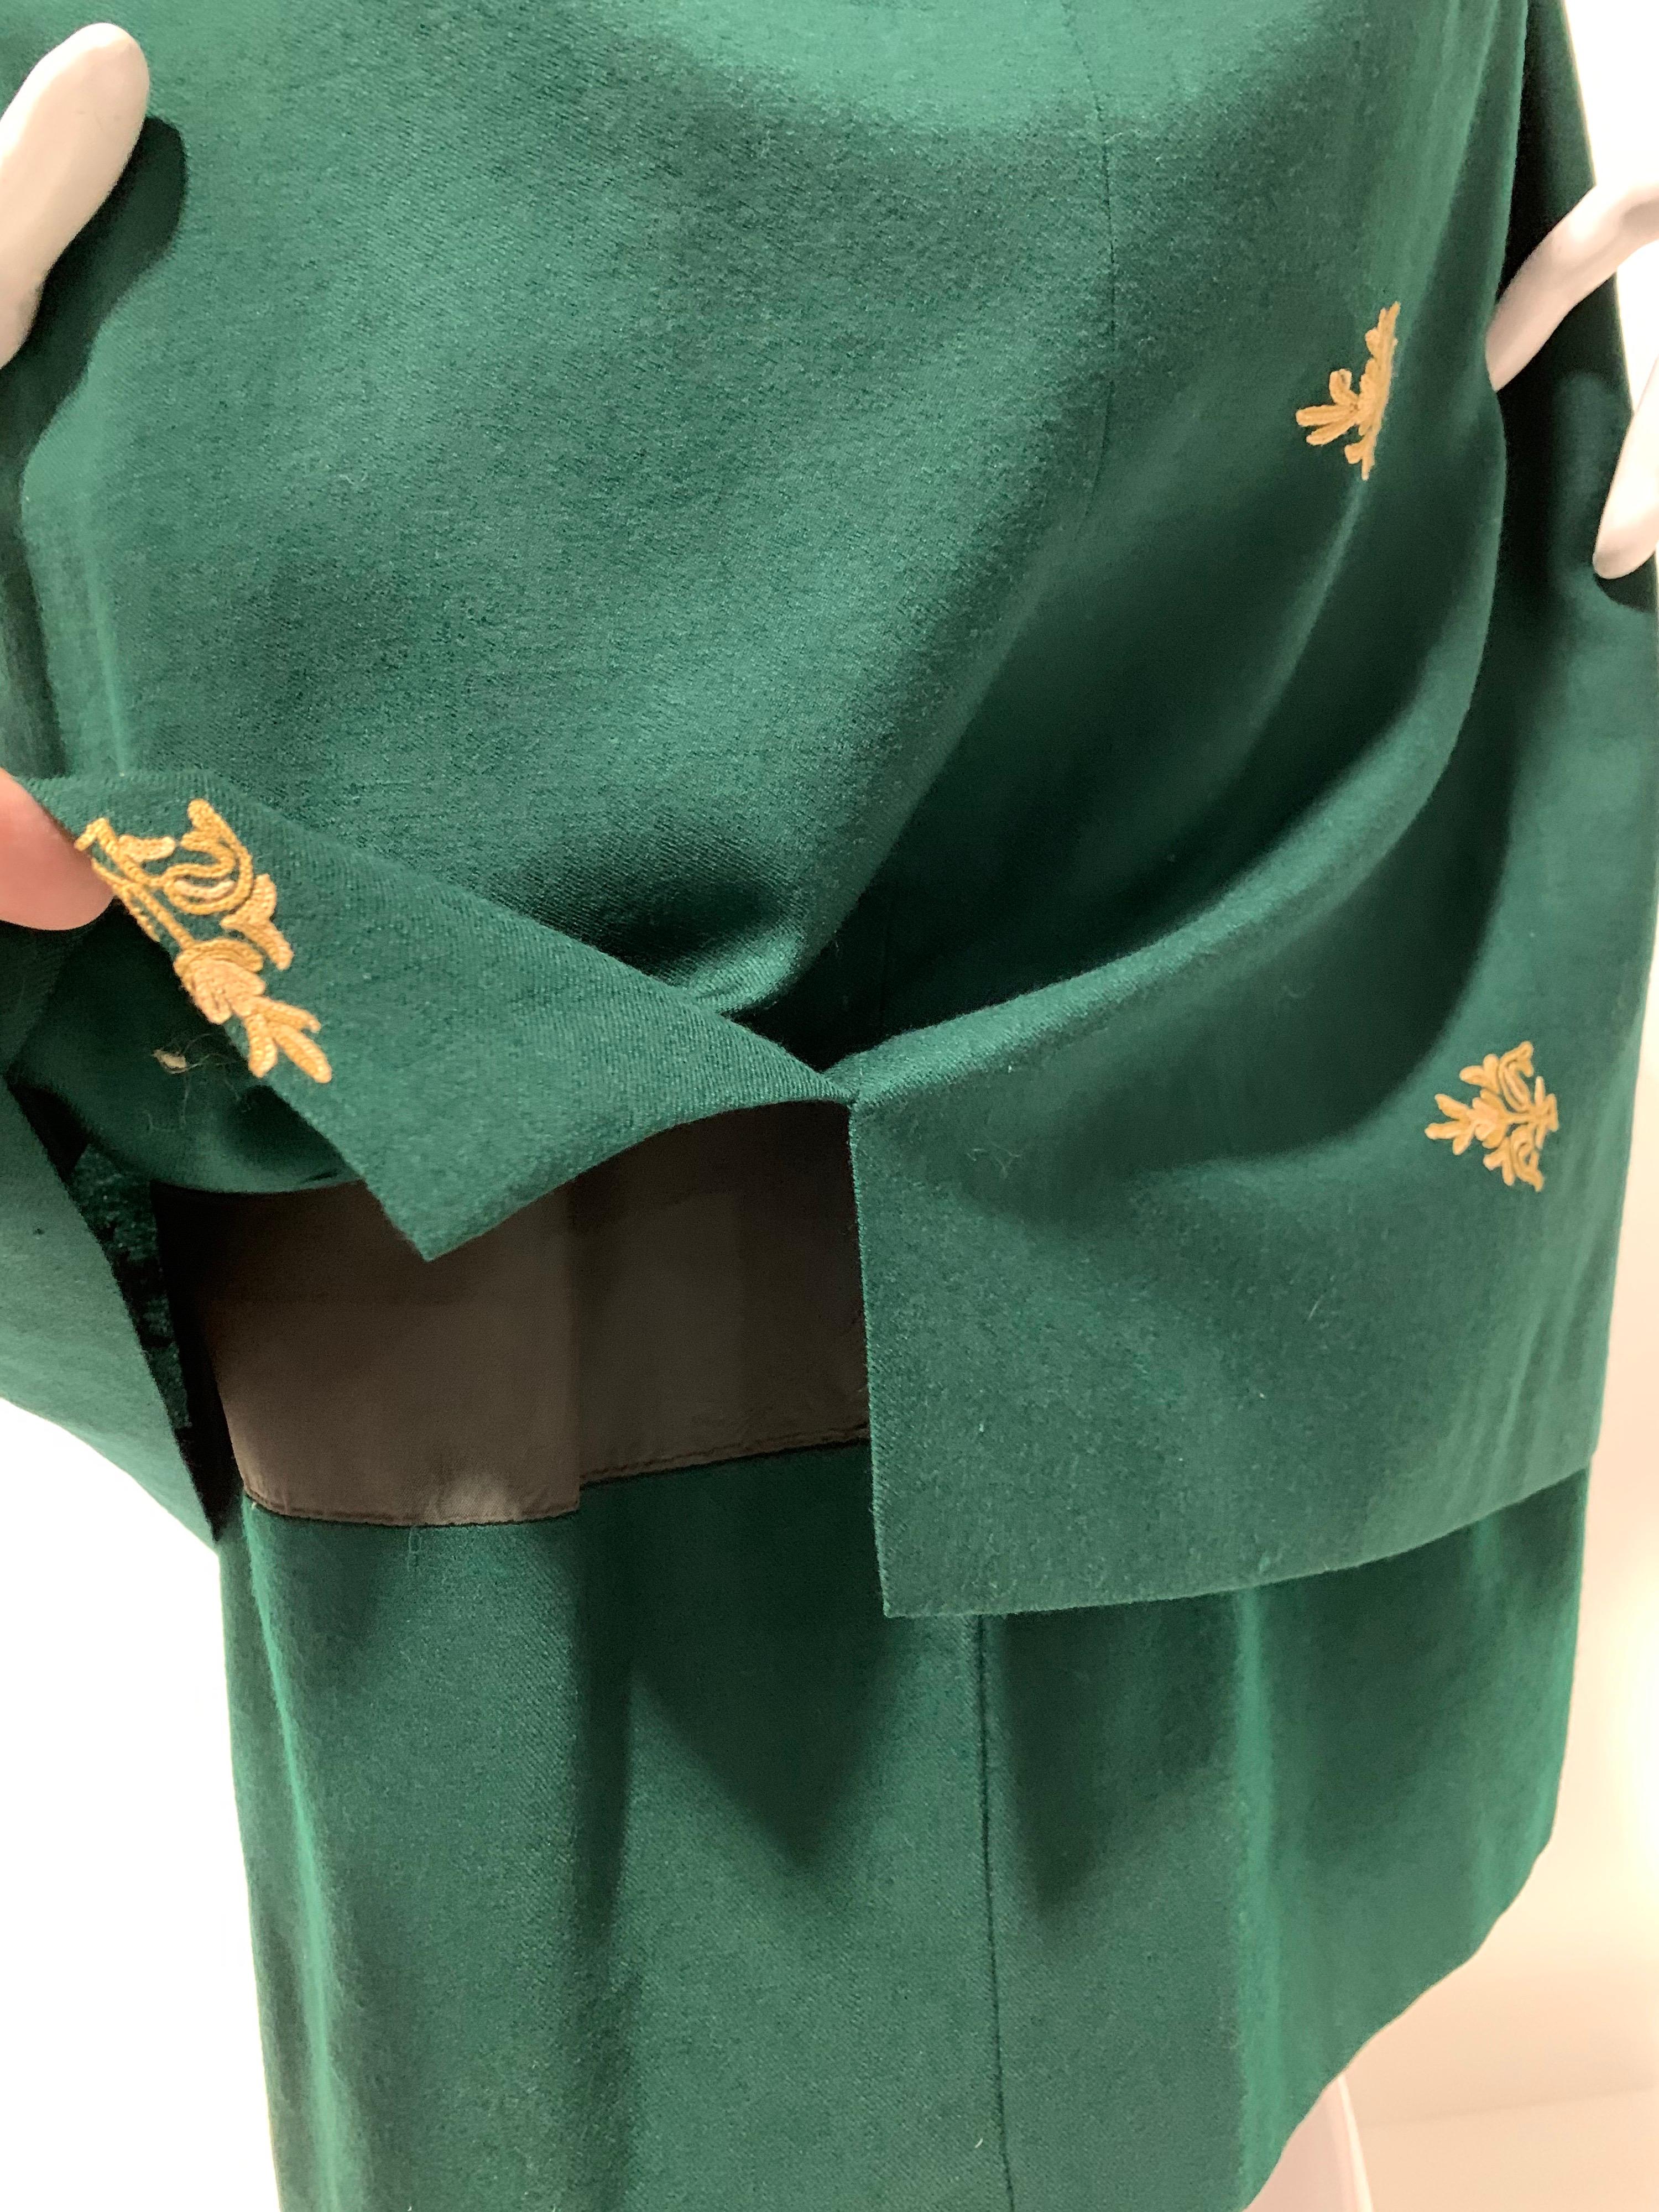 1950 Custom Made Hunter Green Crewel Cord Embroidered Wool Dress Size 10 For Sale 4